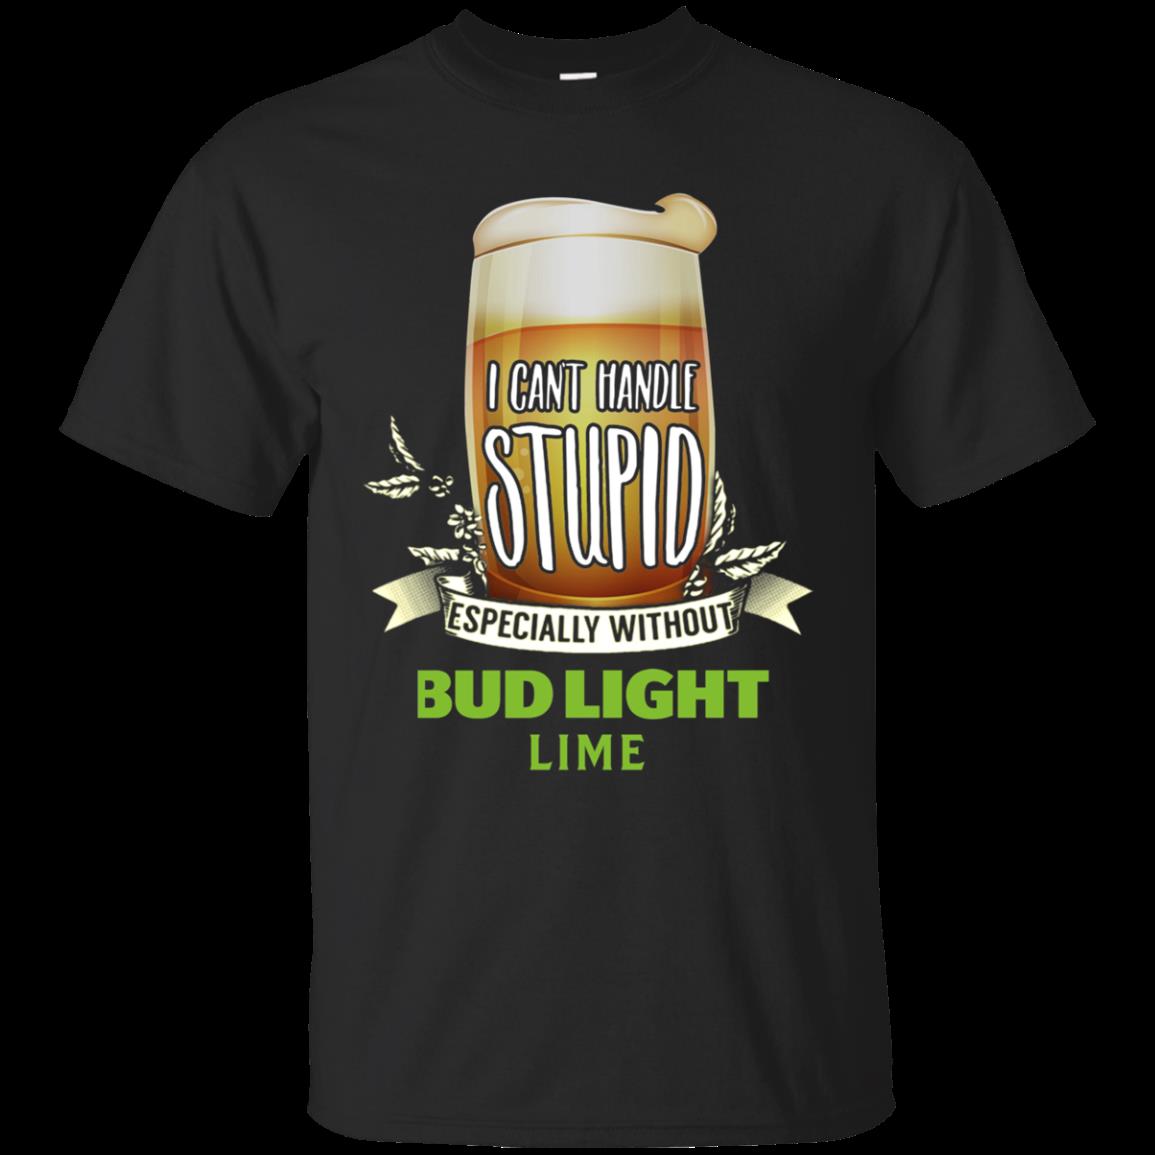 I Can’t Handle Stupid Especially Without Bud Light Lime T Shirt Hoodie Sweater